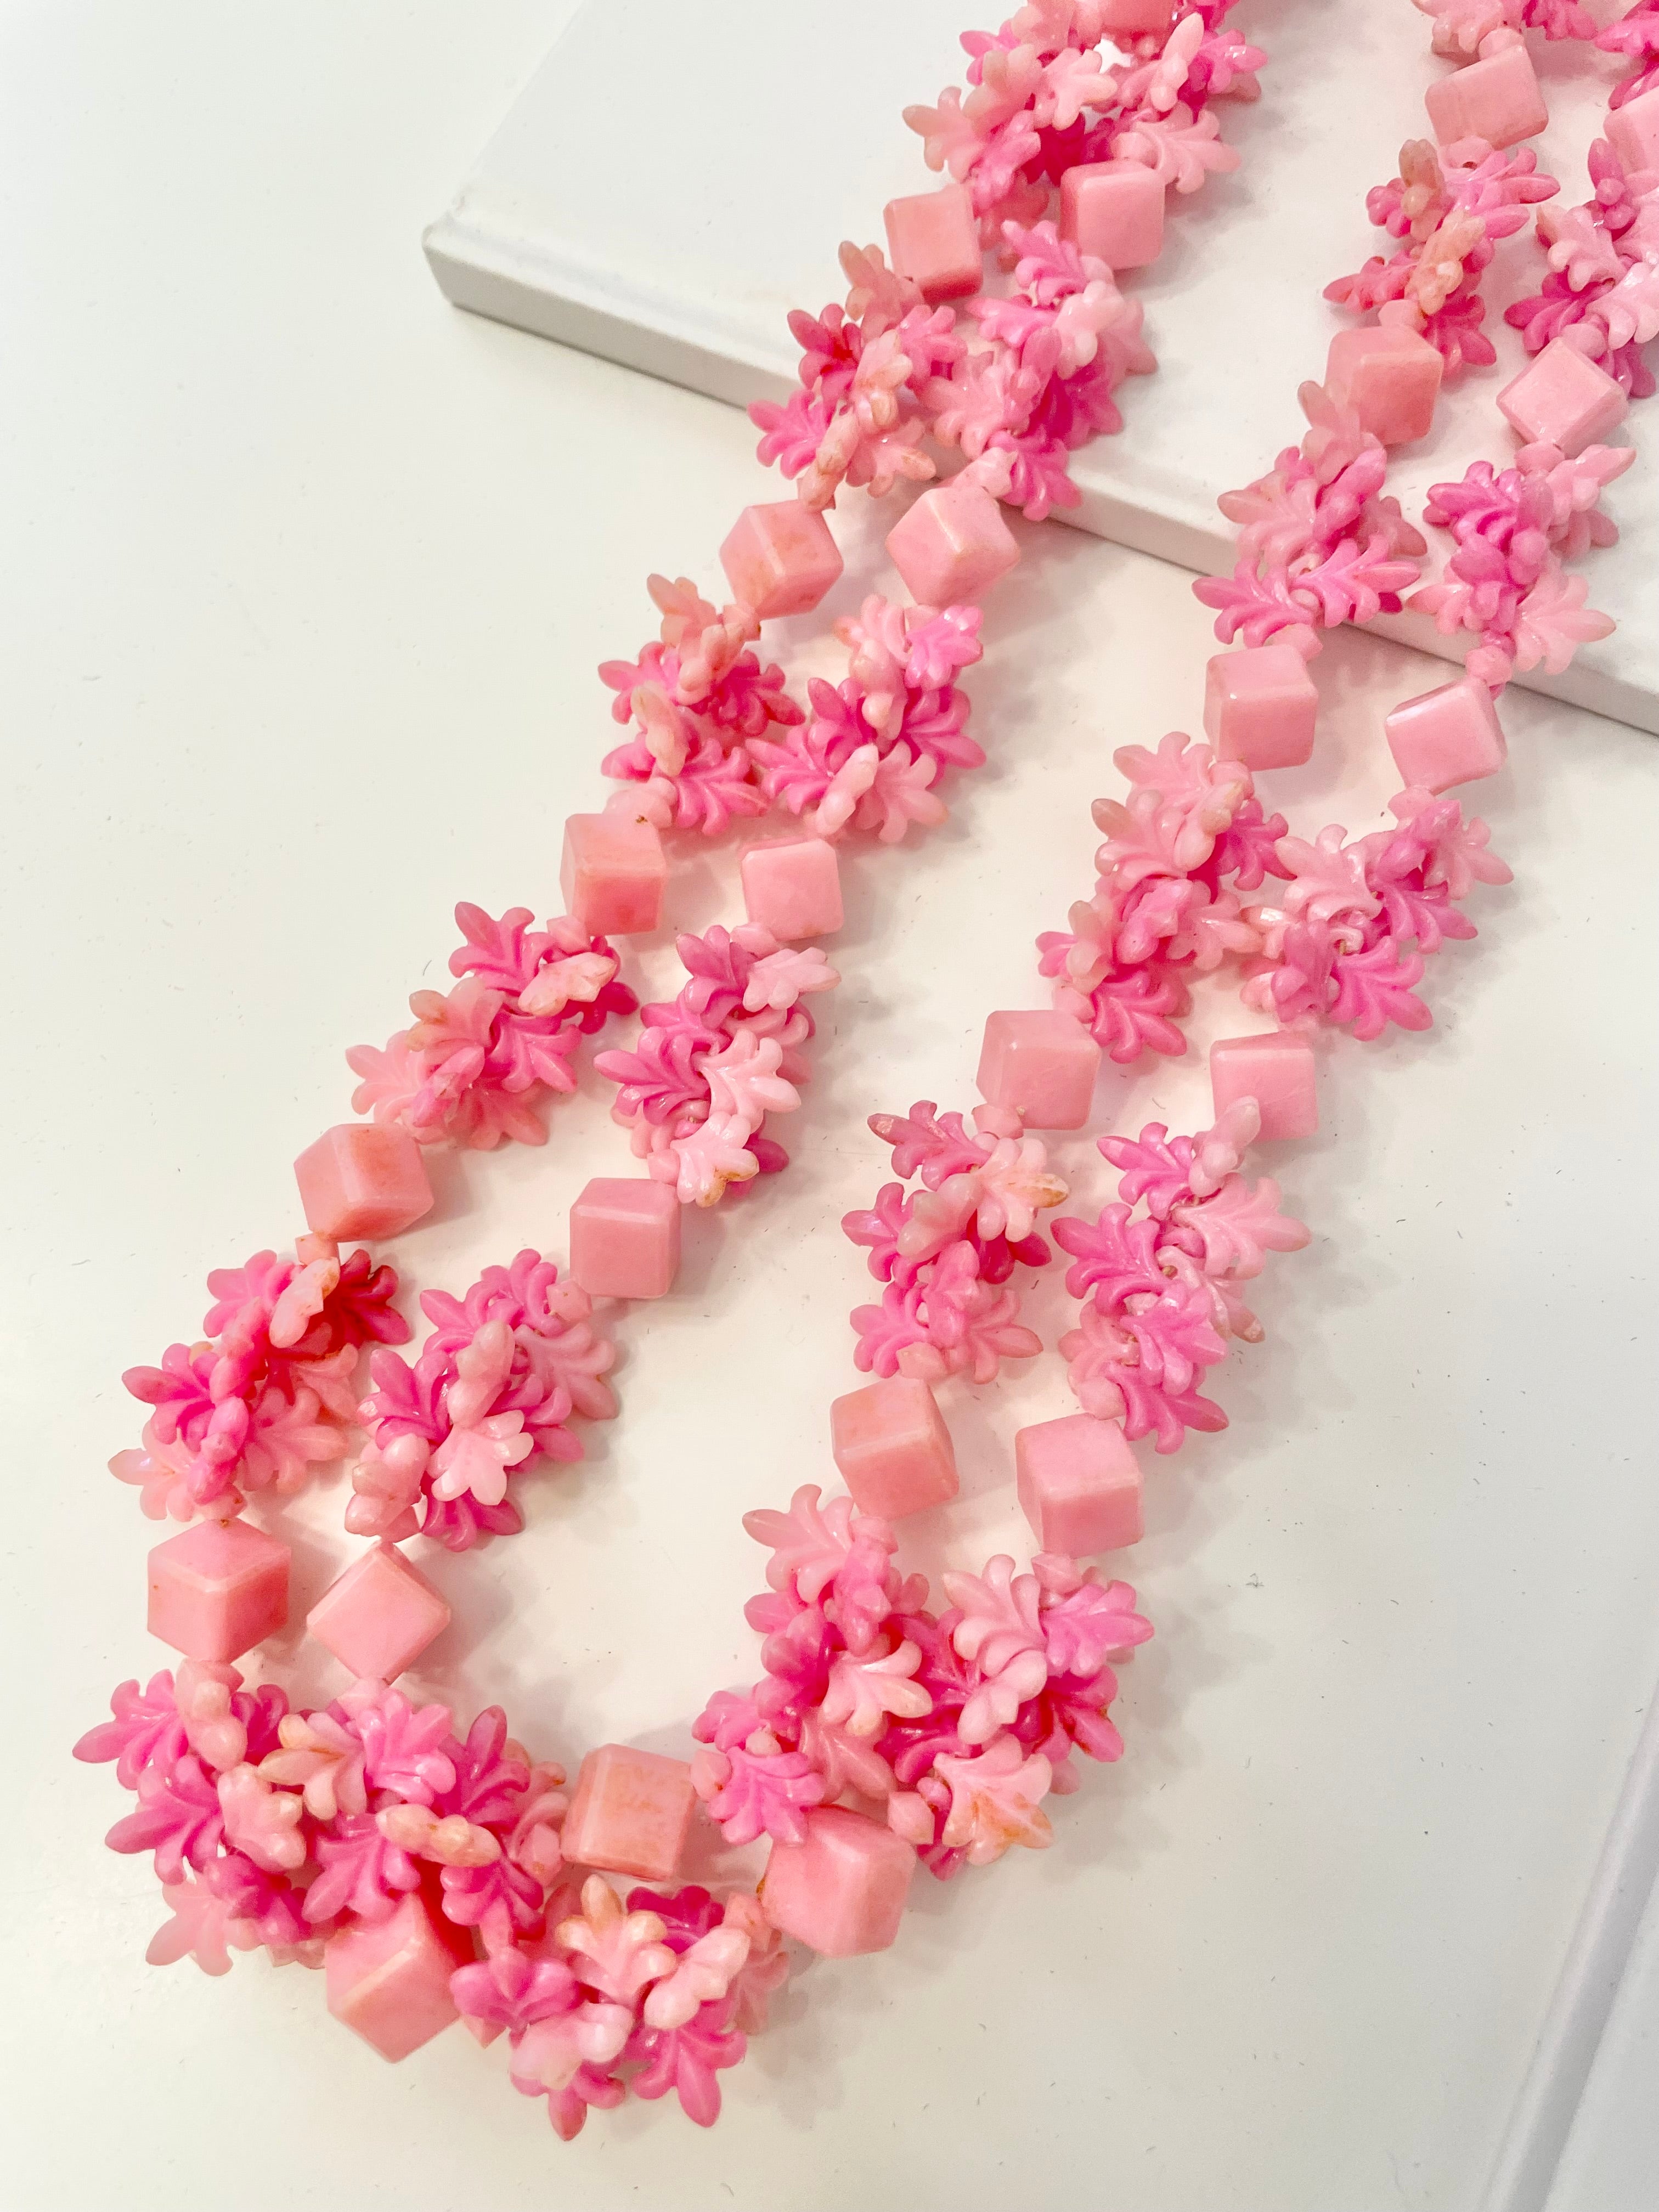 The Flirty Gal adores anything pink. This fun colorful necklace is truly delightful! So preppy.